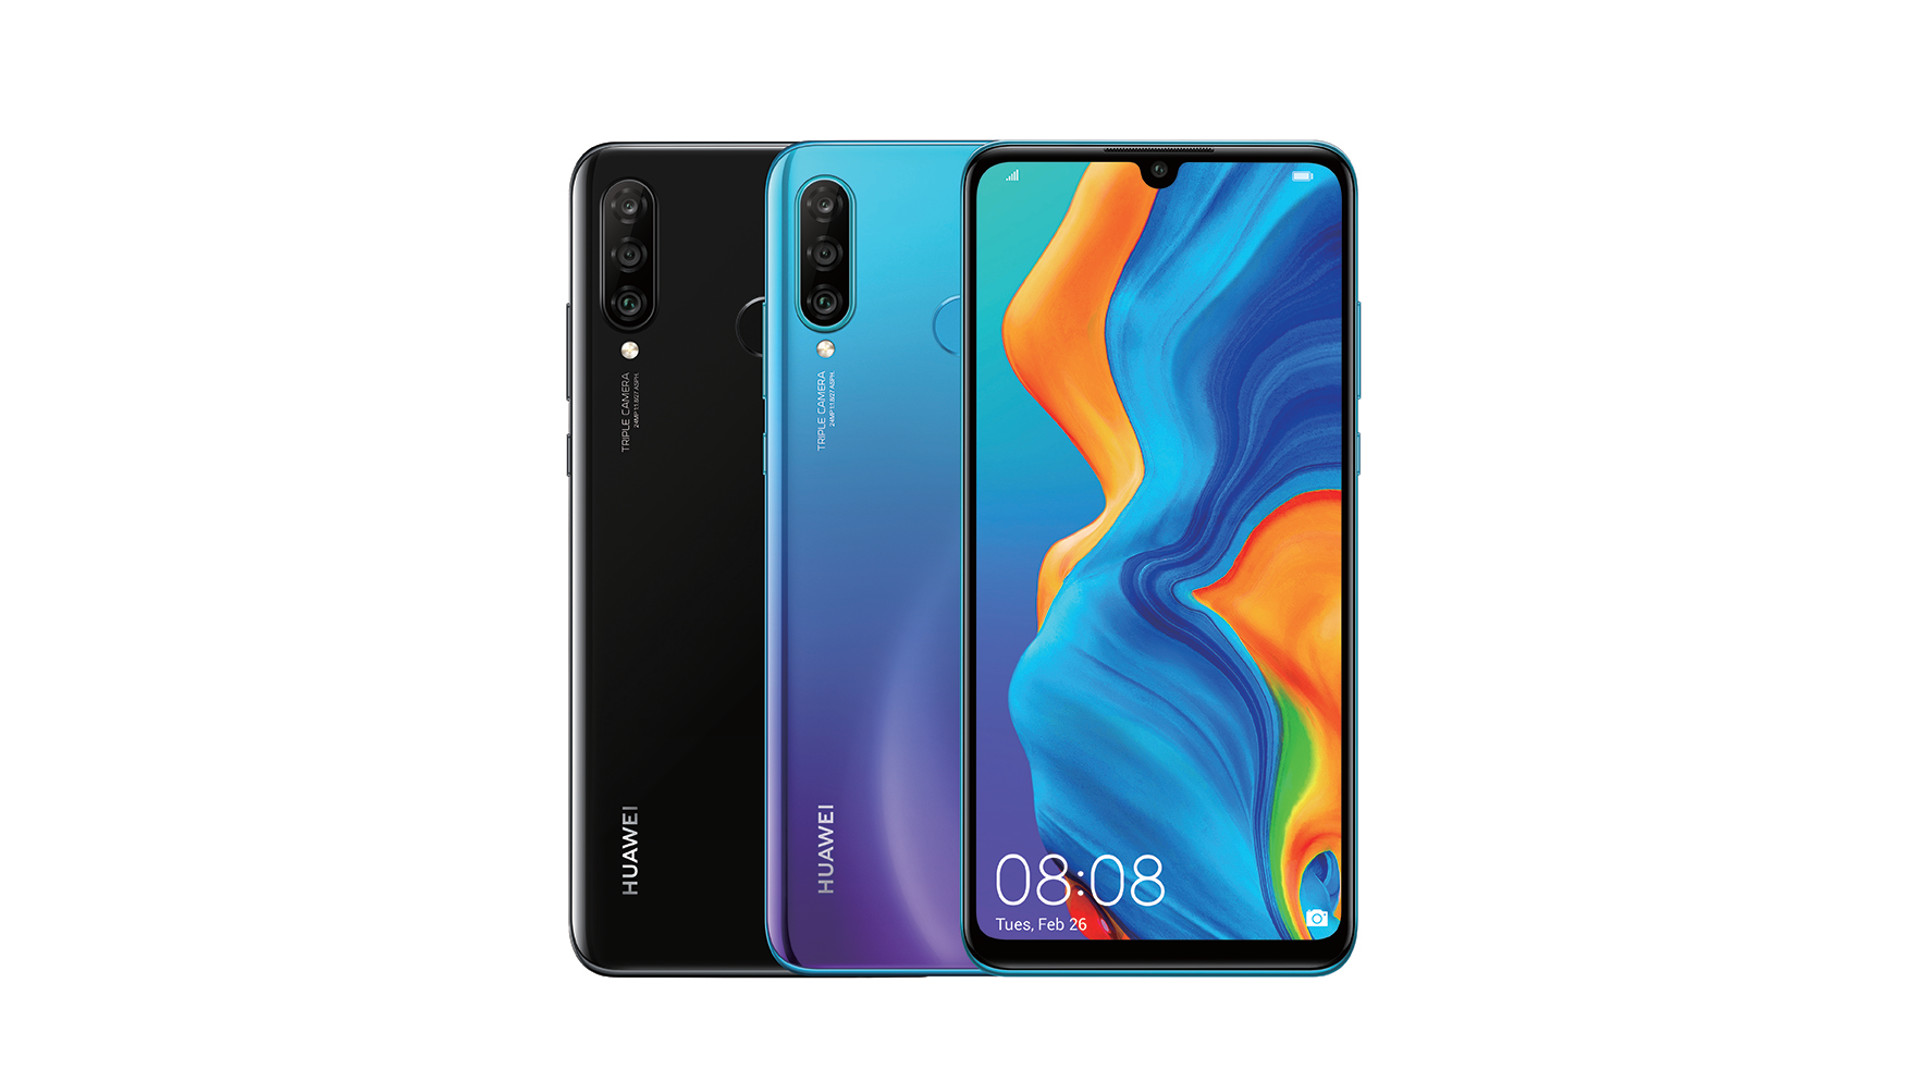 The HUAWEI P30 Lite in India